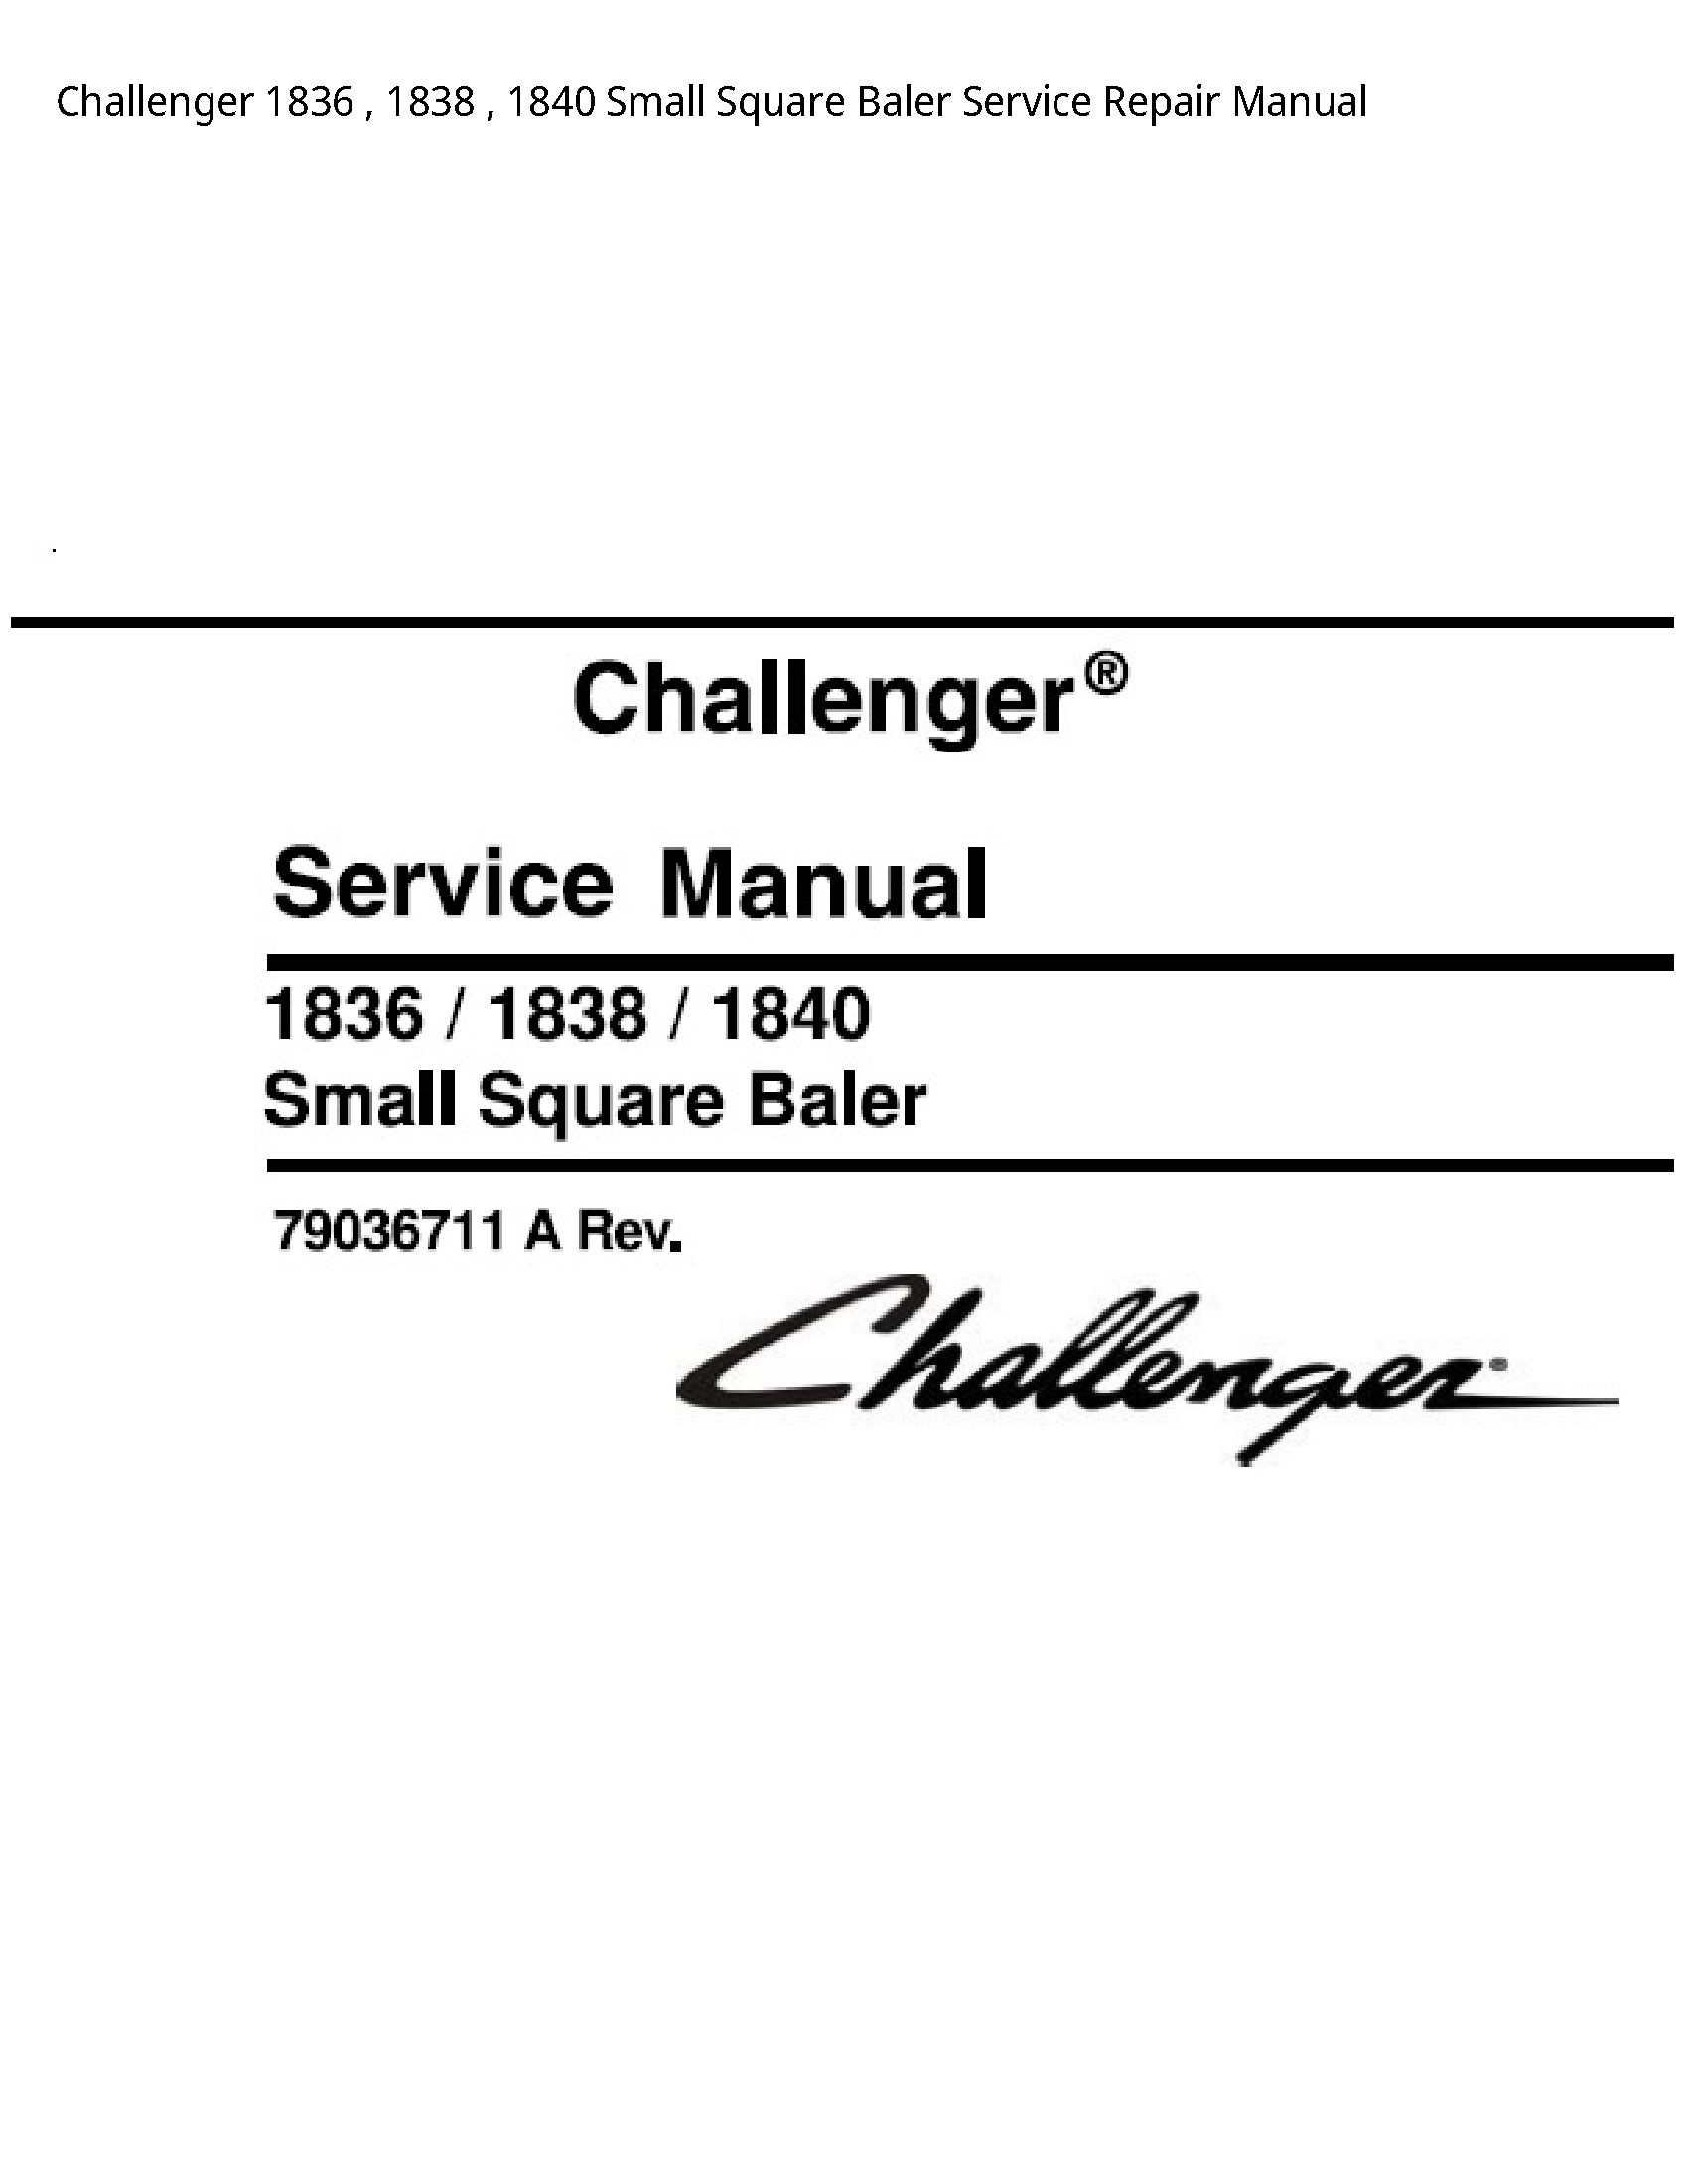 Challenger 1836 Small Square Baler manual